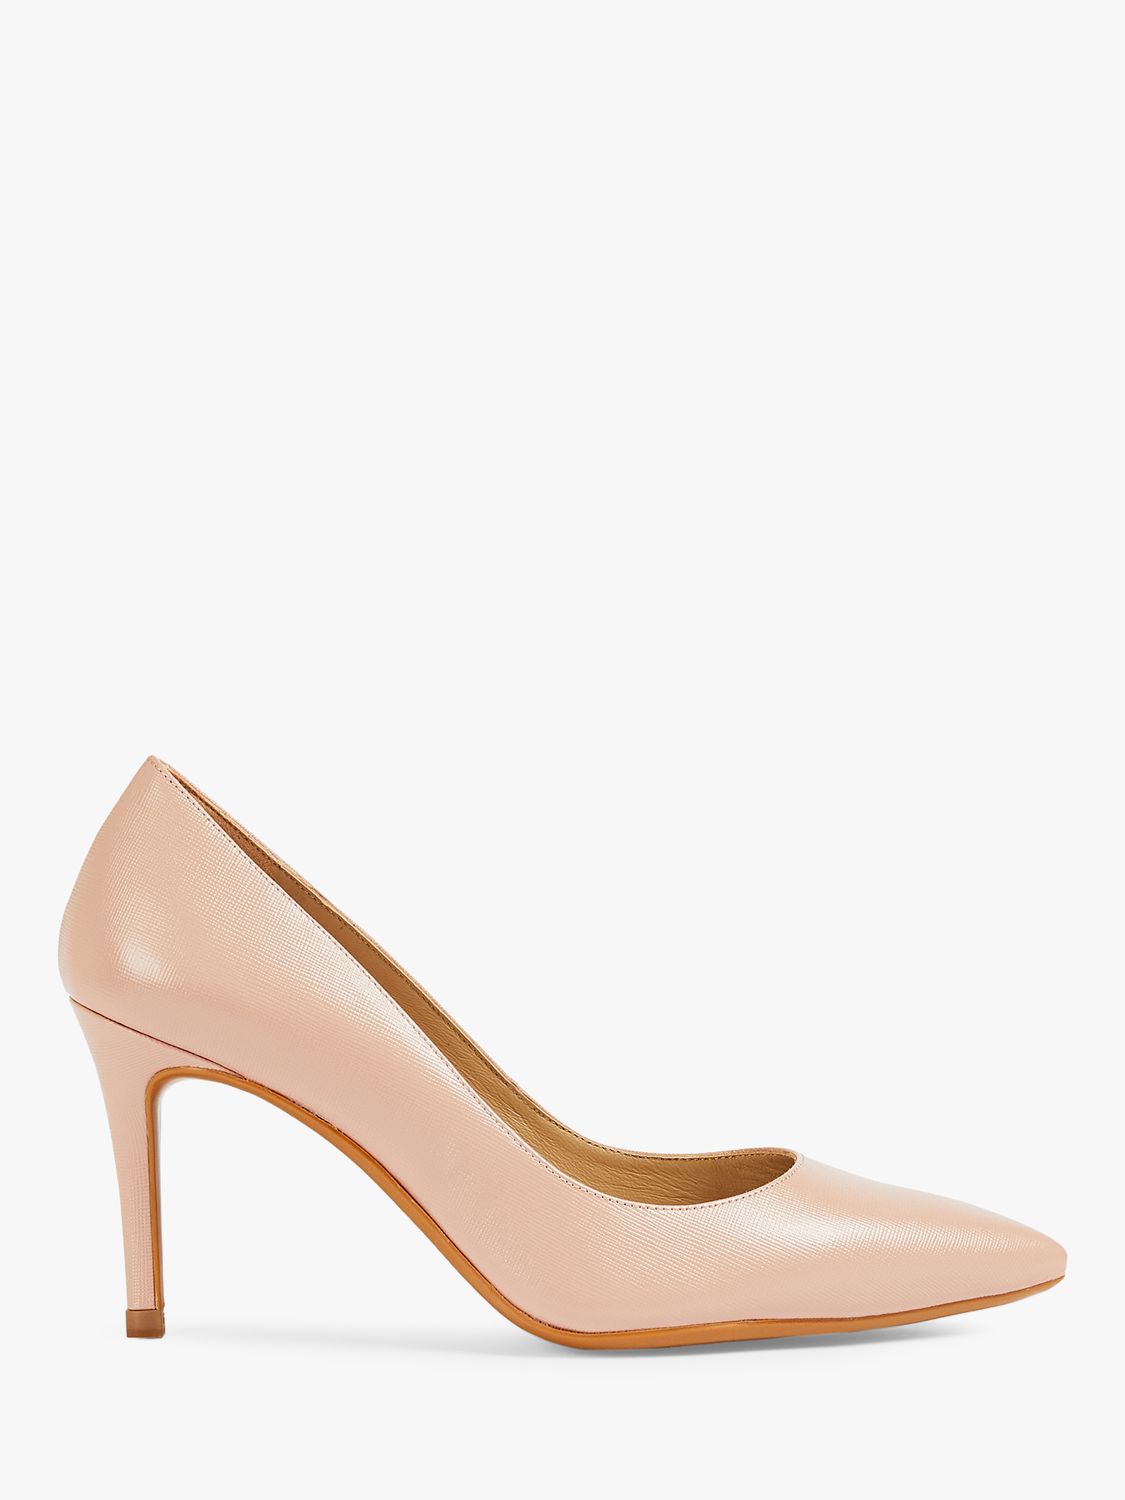 Ted Baker Alysse Leather Court Shoes, Dusky-pink at John Lewis & Partners